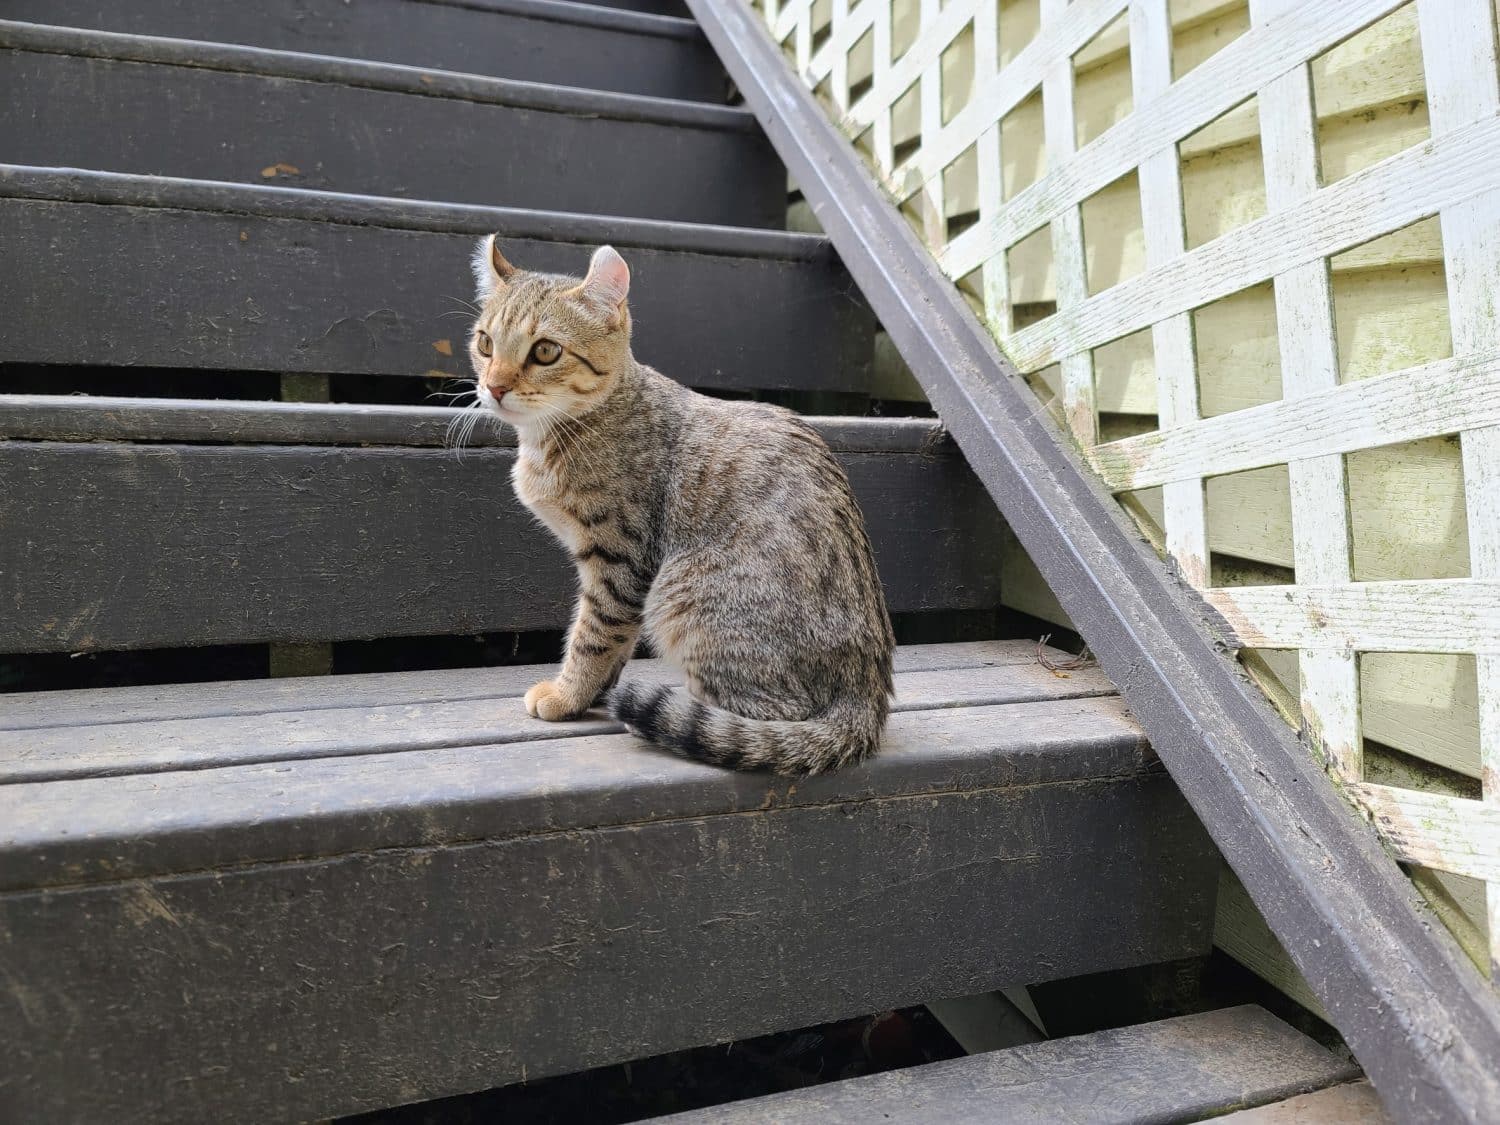 A highlander kitten sitting on a staircase.